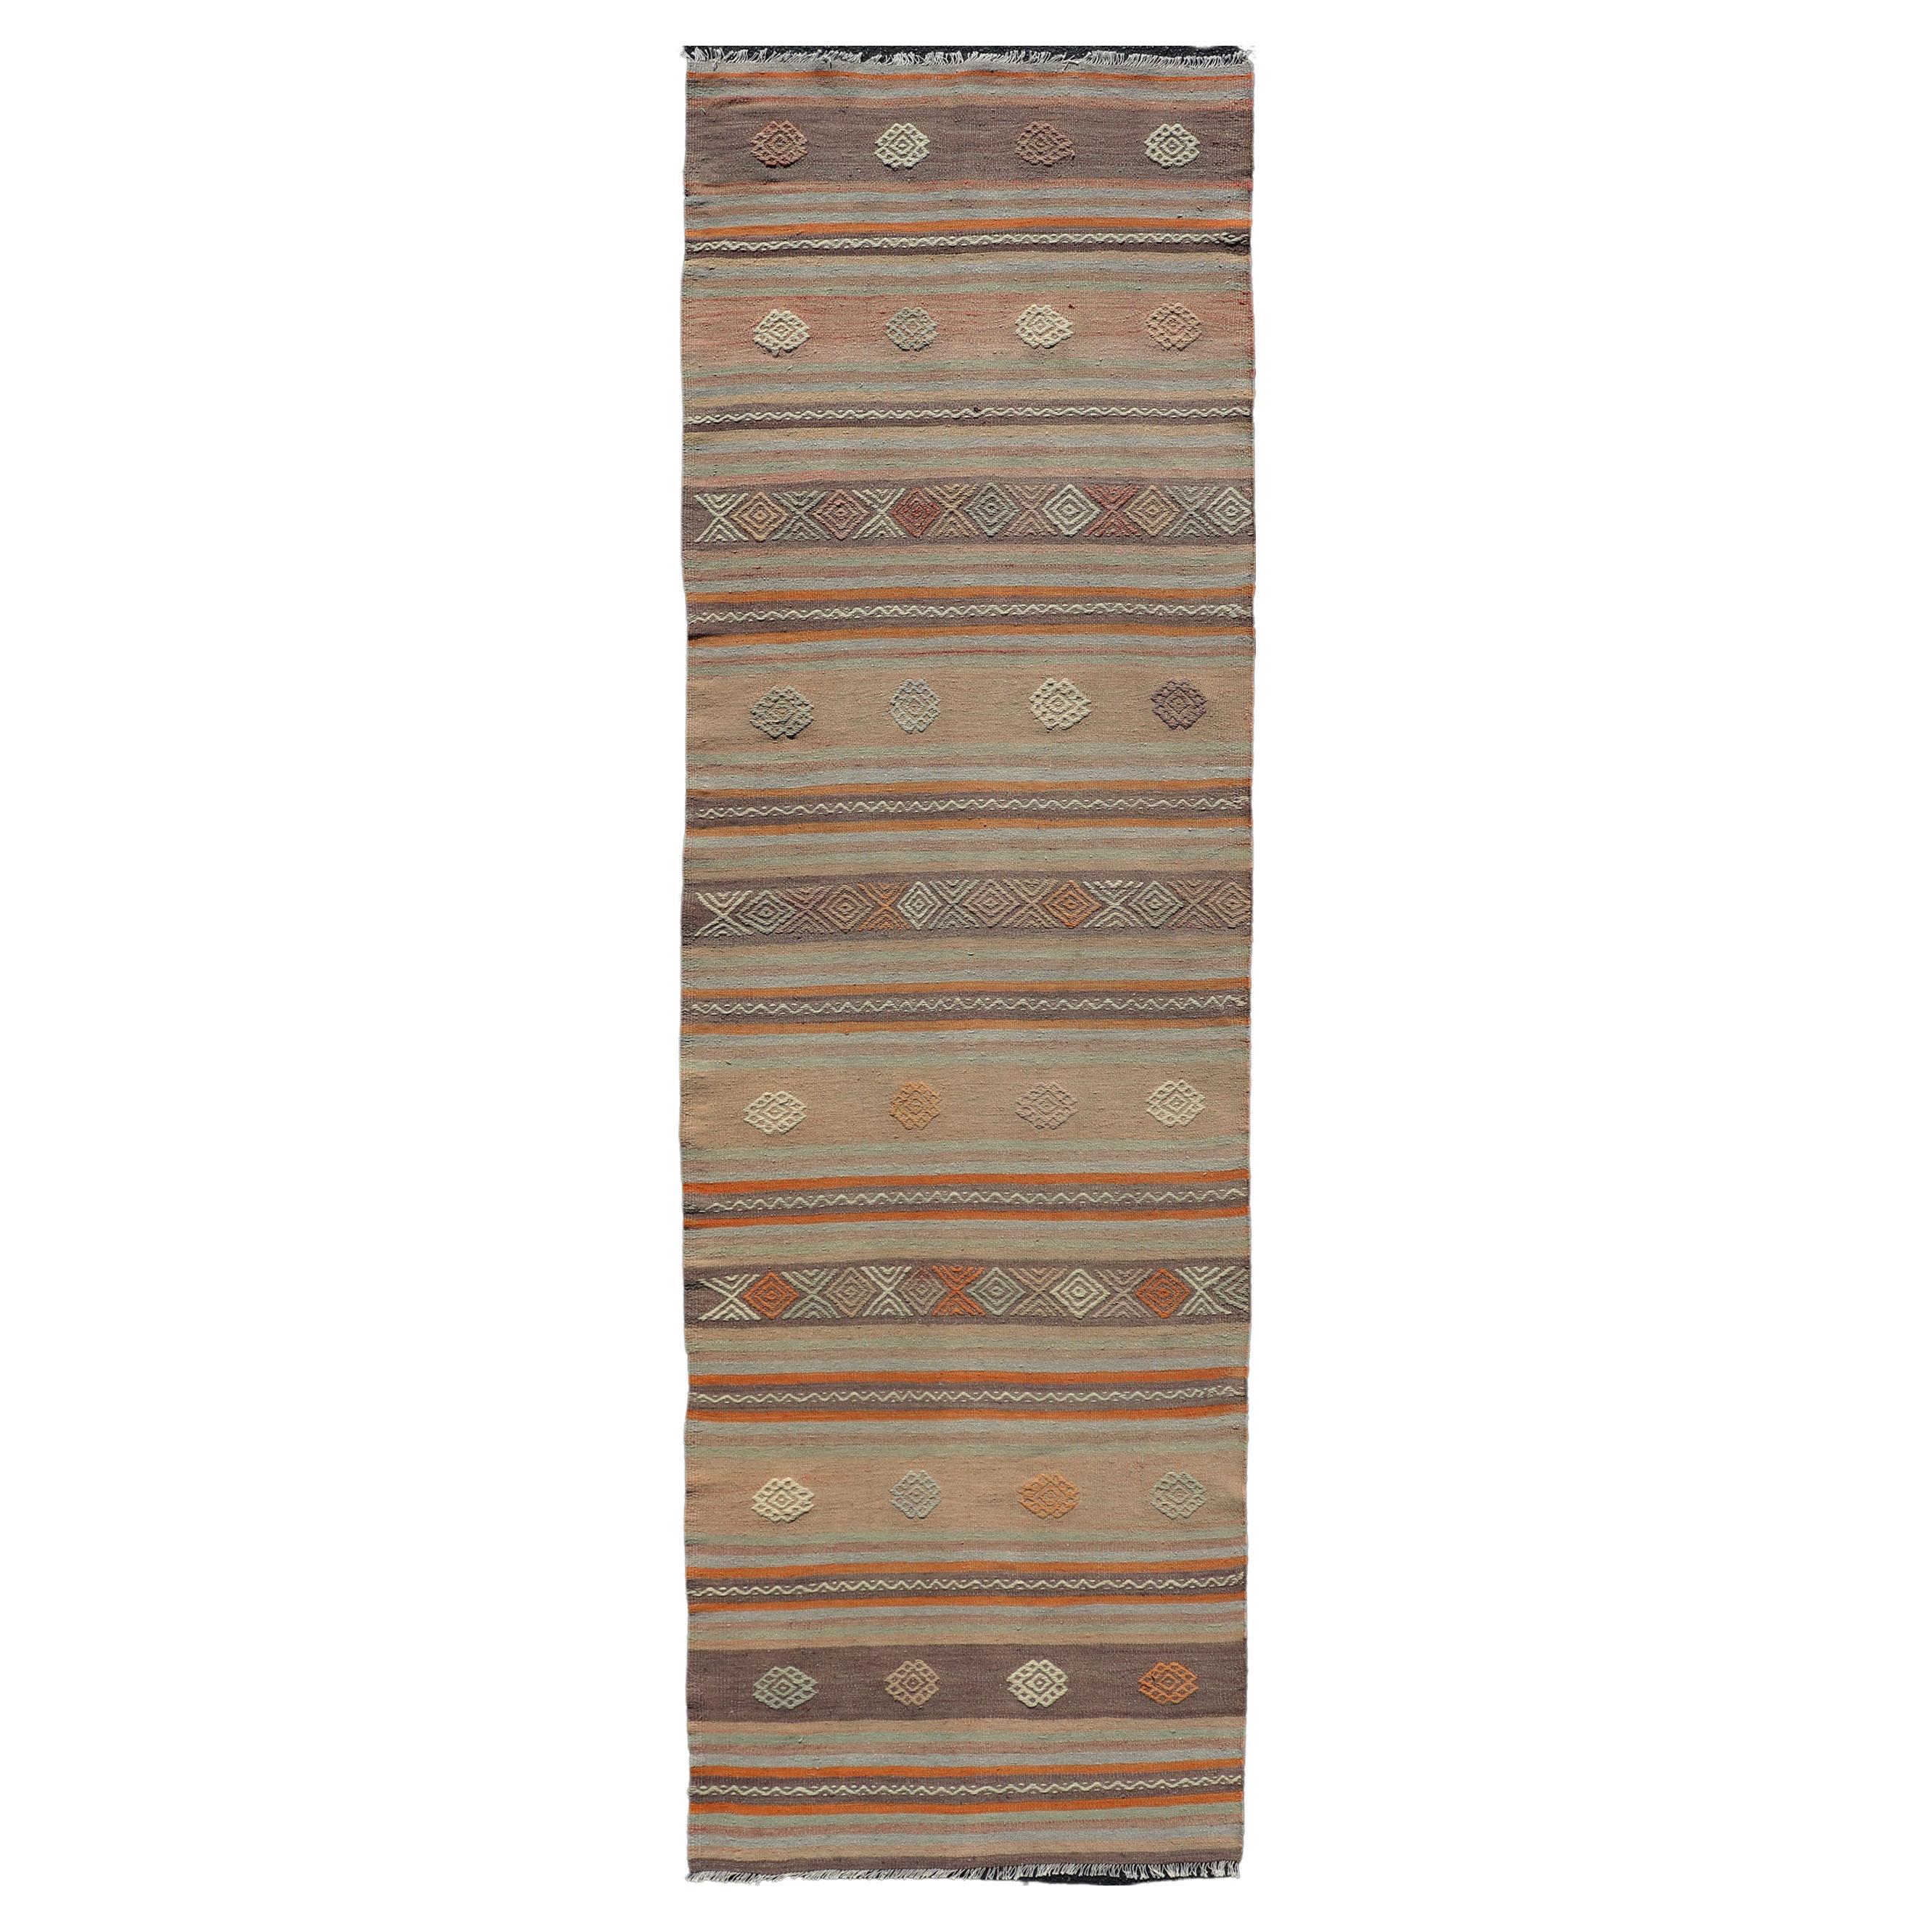 Turkish Vintage Flat-Weave Kilim in Muted Colors with Stripes and Embroideries